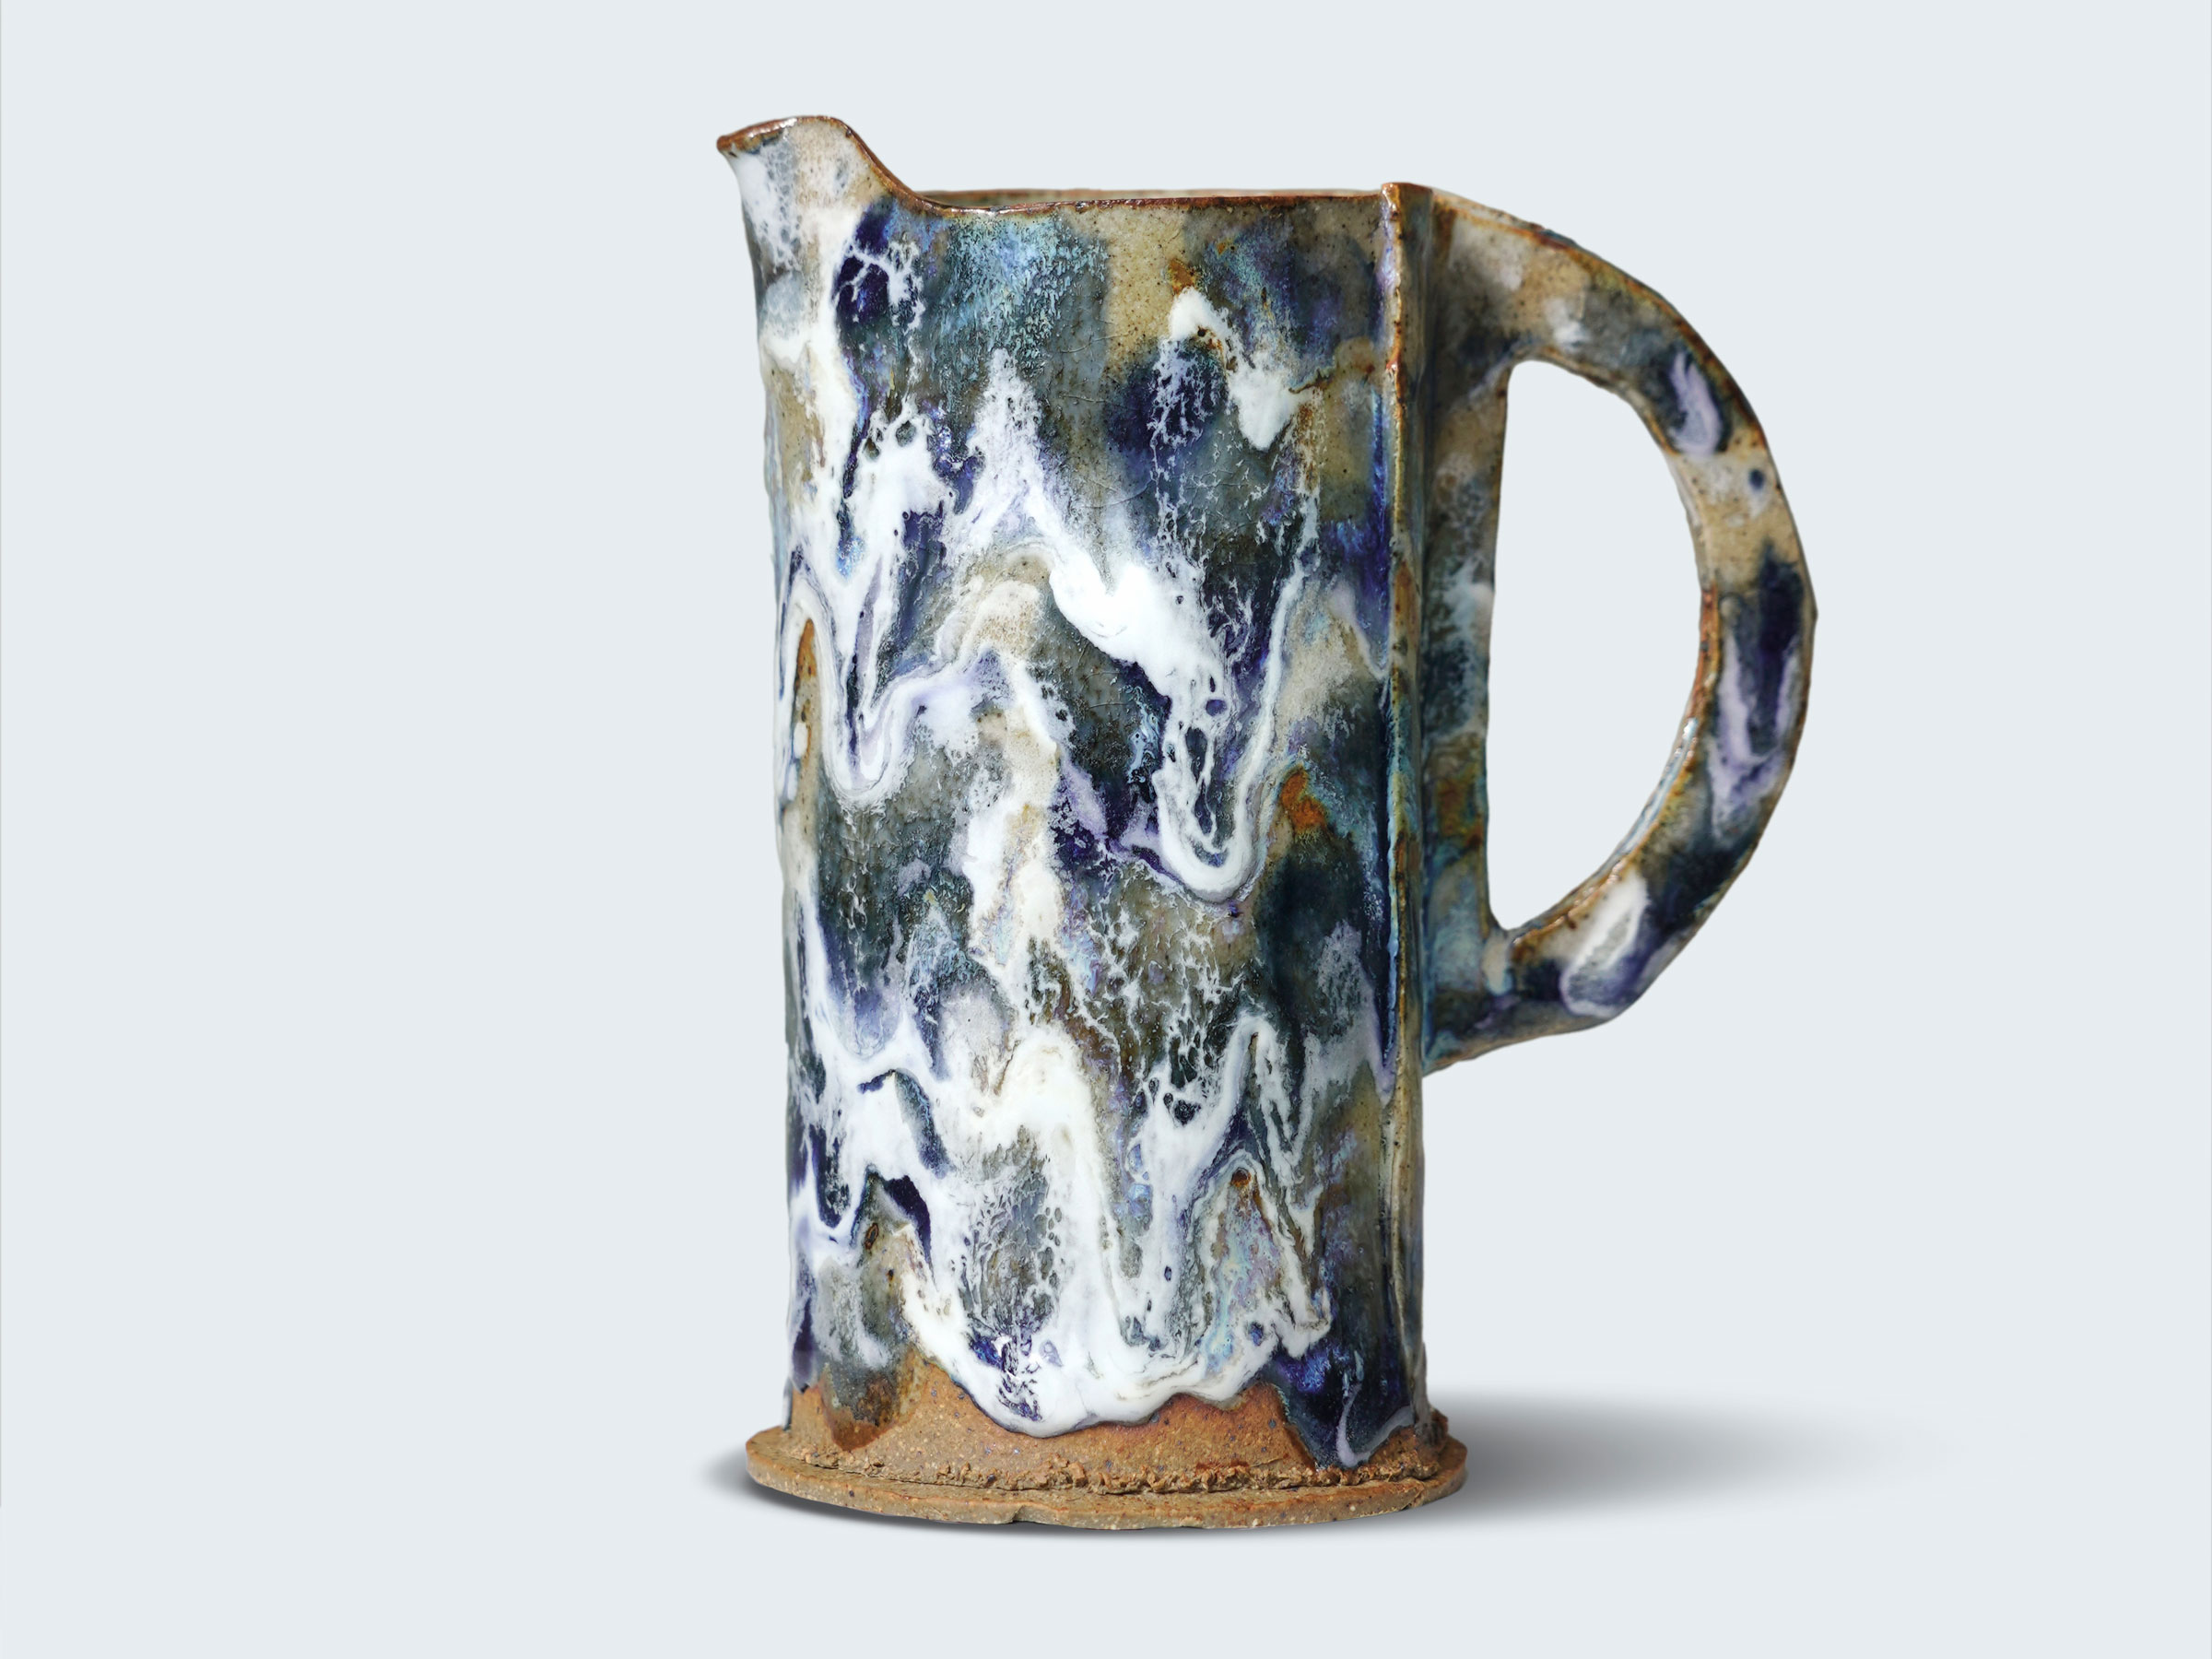 A ceramic pitcher featured in Brian Molanphy's solo exhibition.